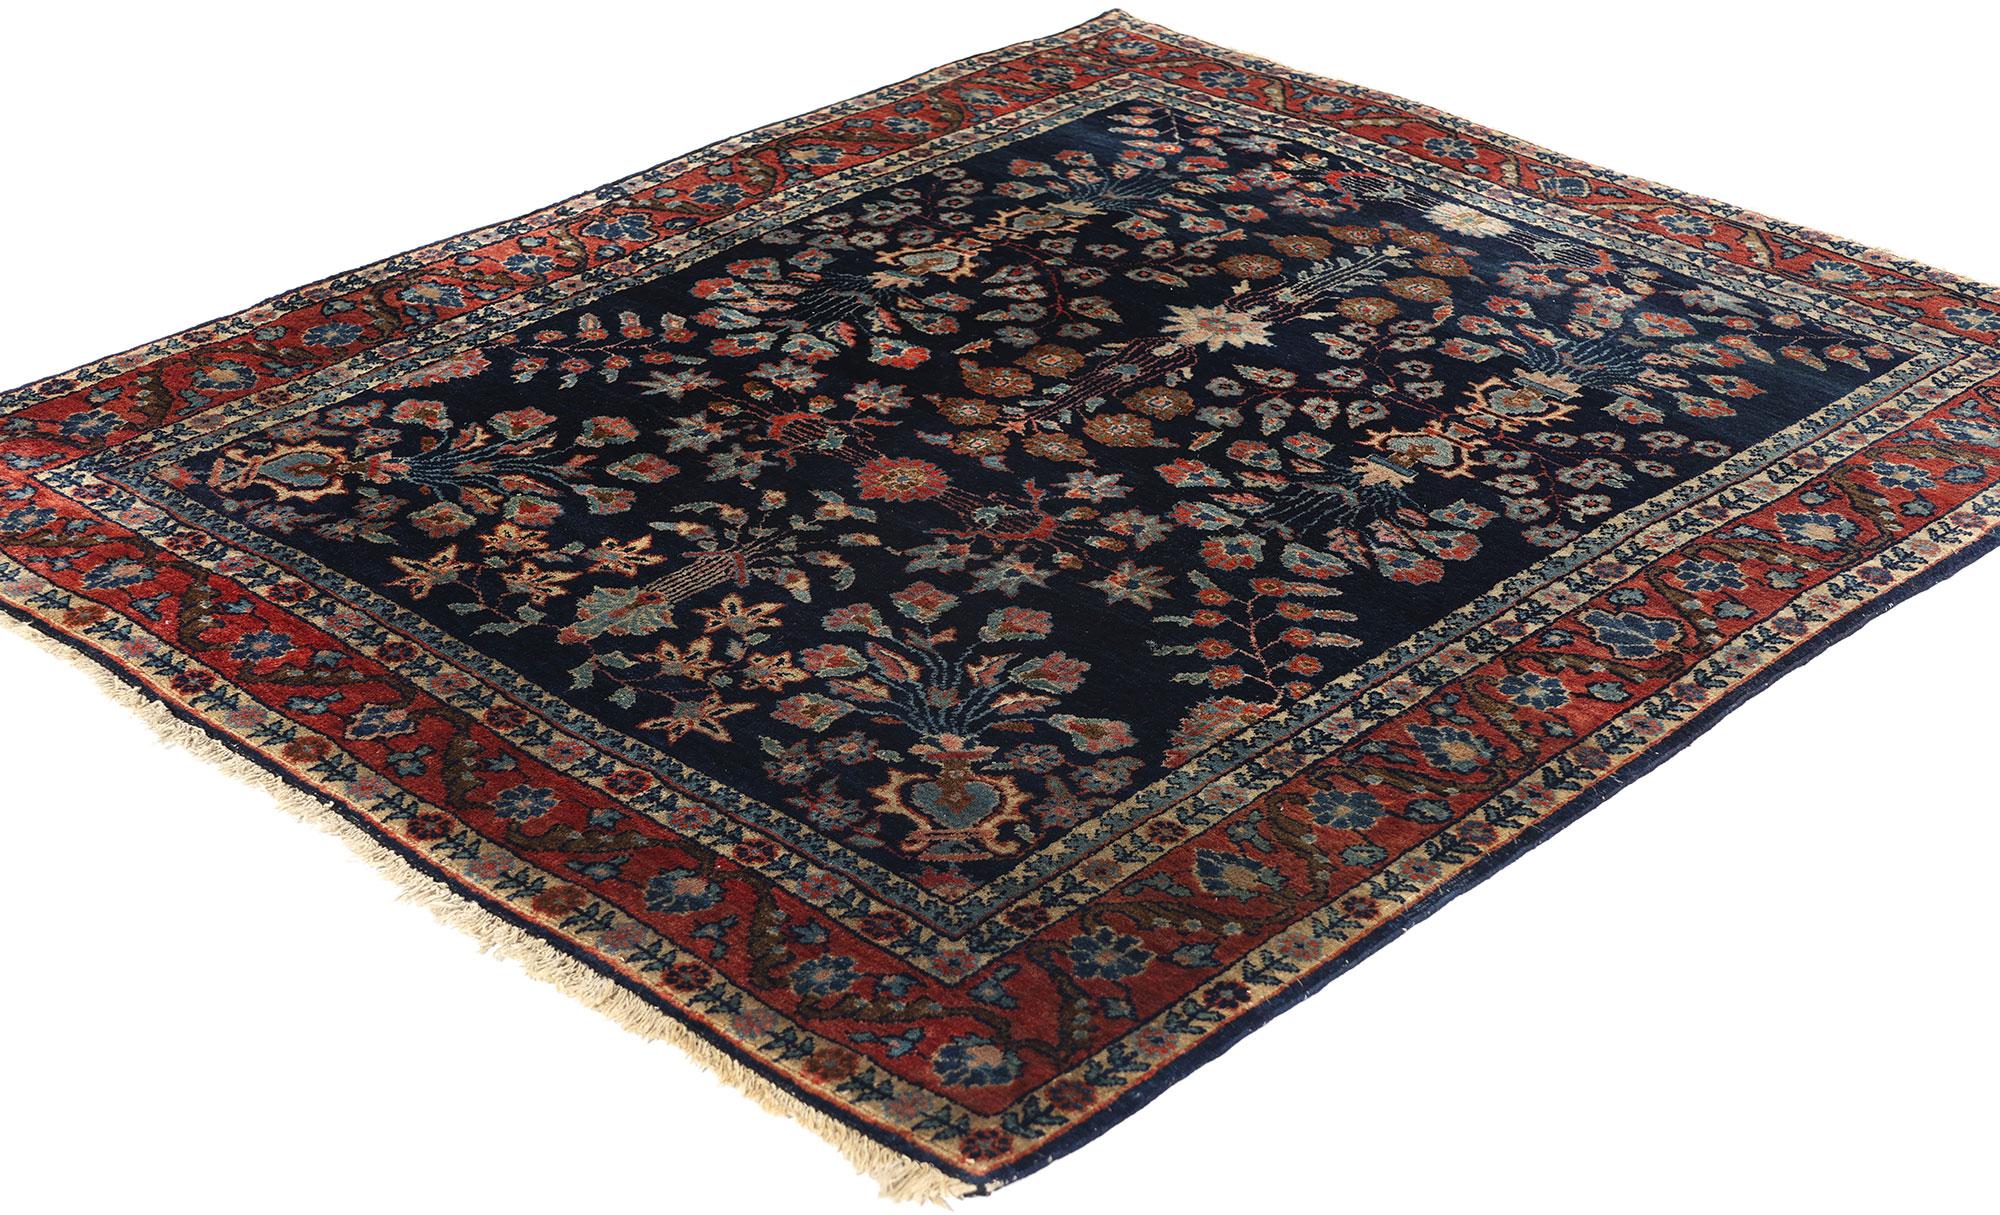 78763 Antique Navy Blue Persian Mohajeran Sarouk Rug, 03'03 x 03'10. Persian Mohajeran Sarouk rugs are exquisite handwoven creations originating from the Sarouk region of Iran, celebrated for their exceptional quality, intricate designs, and rich